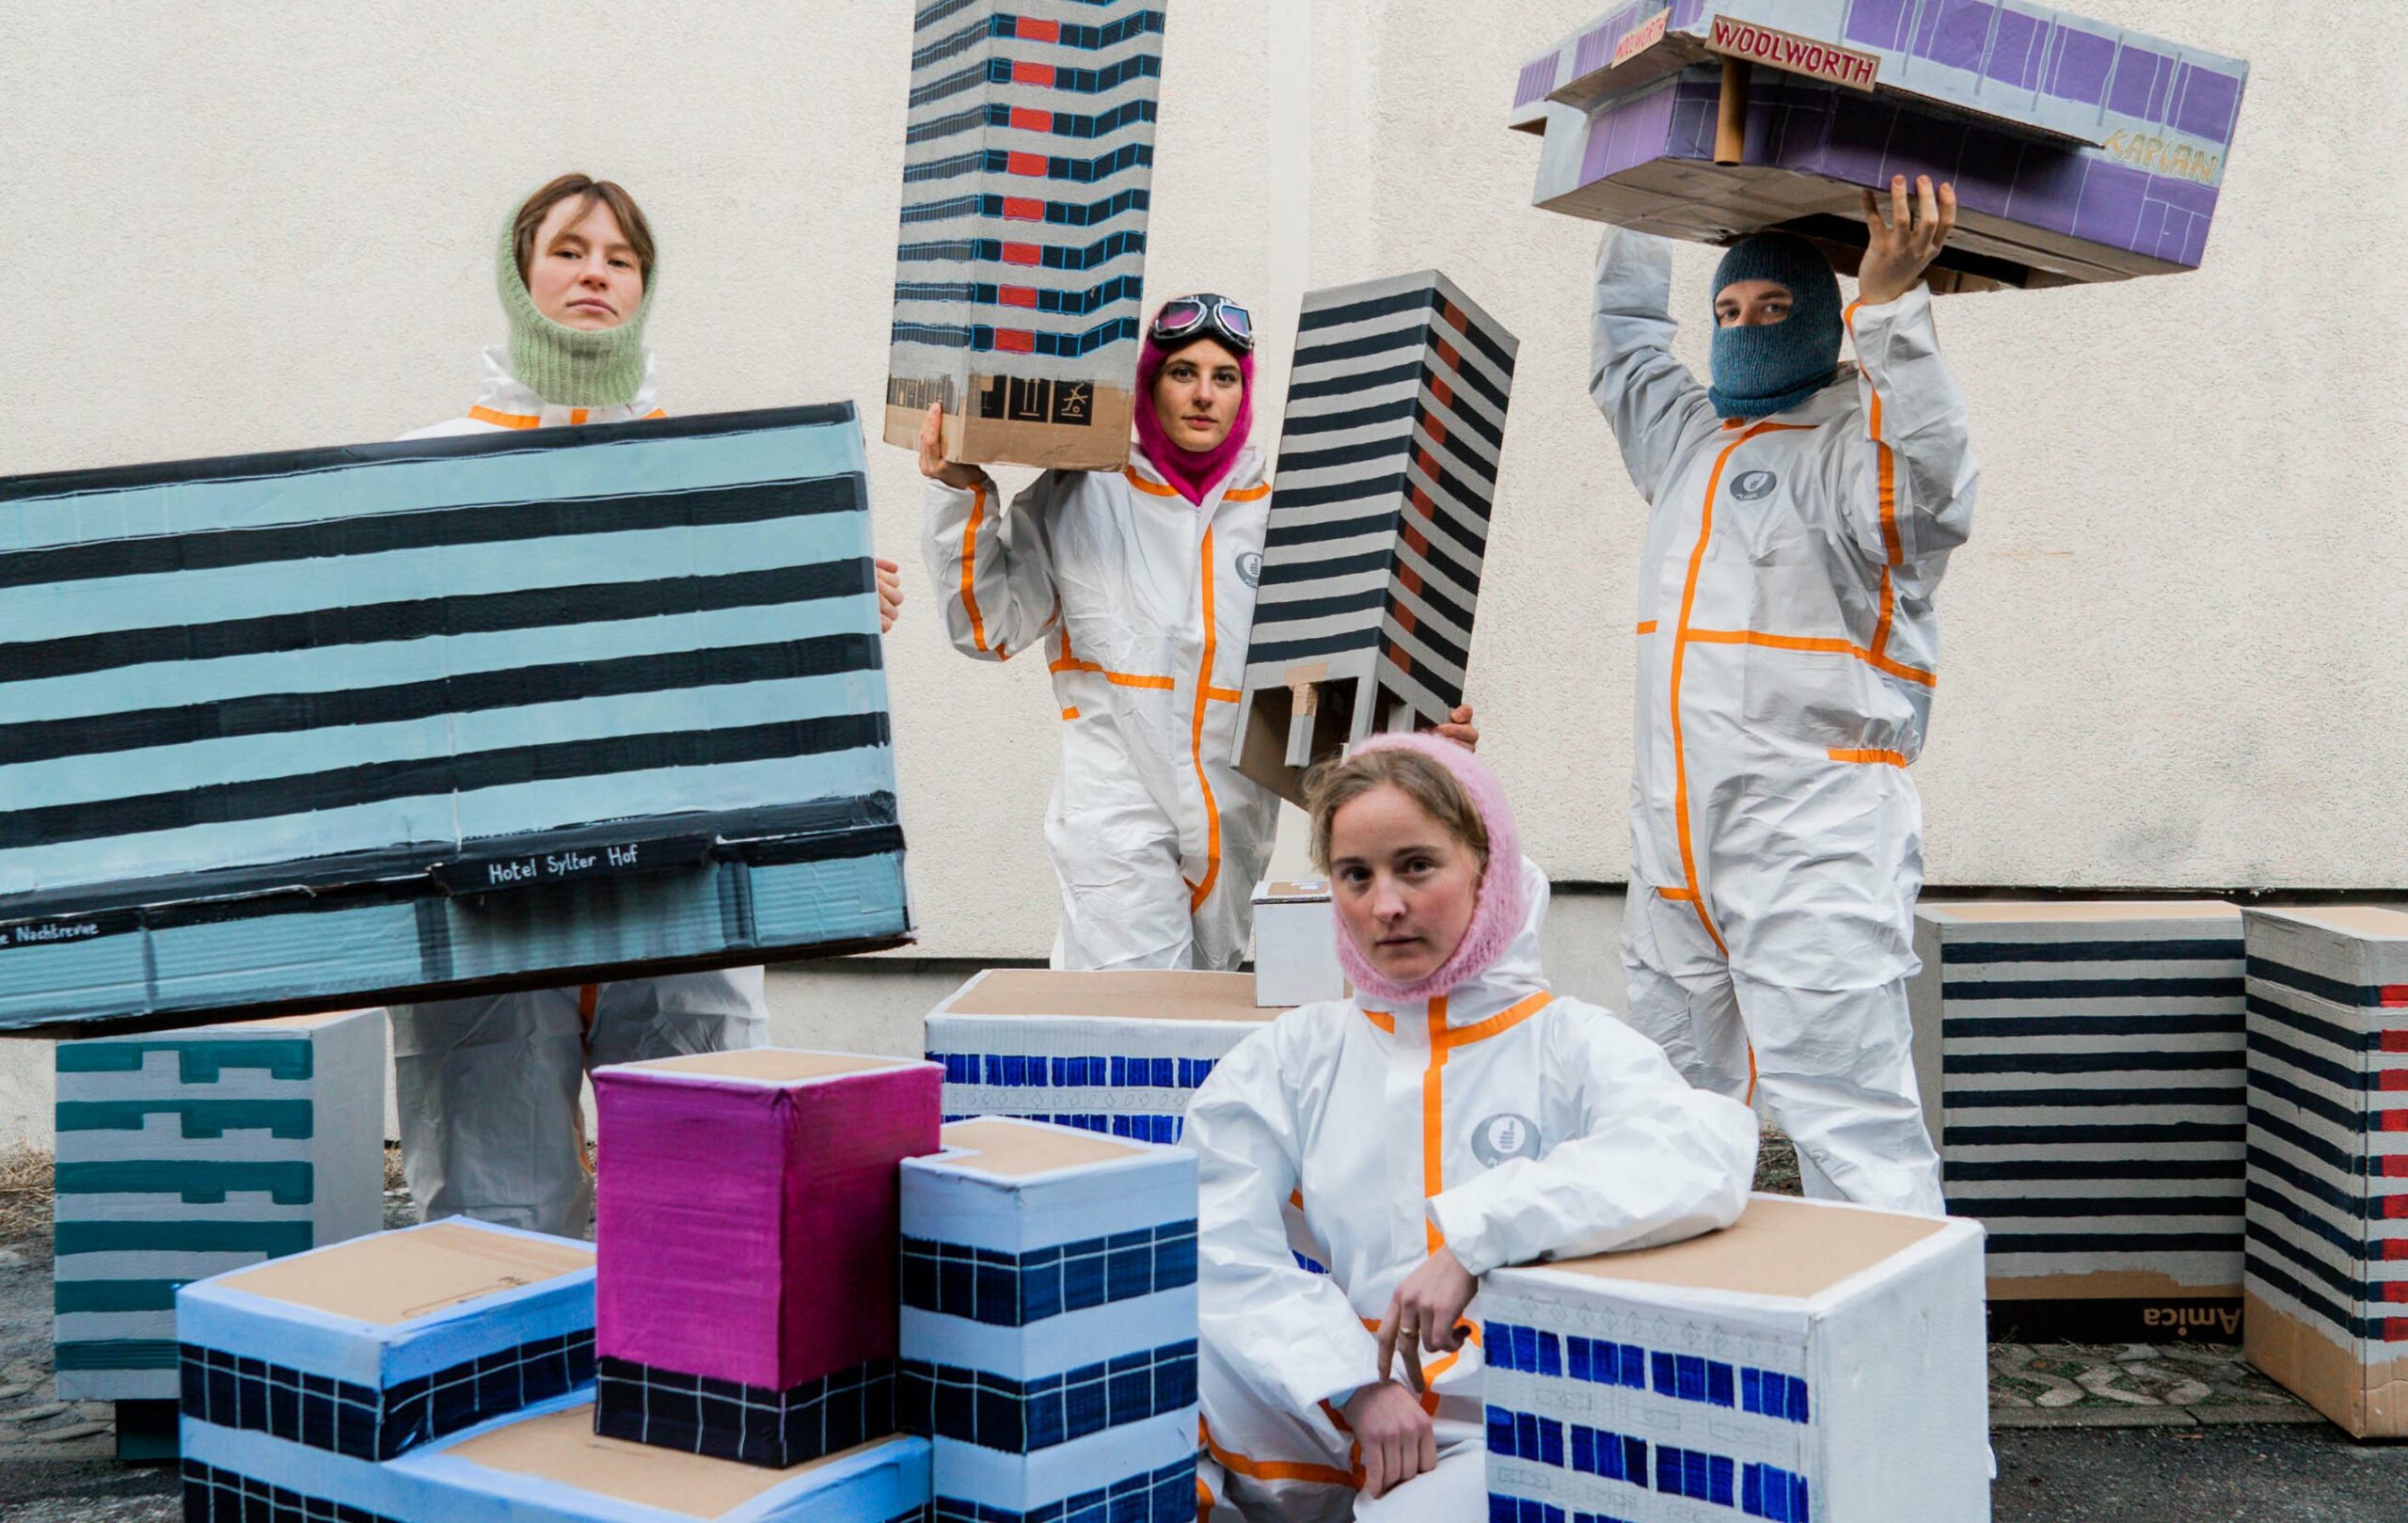 Photo: urban fragment observatory. Lena Löhnert, Florine Schüschke, Jeanne Astrup-Chauvaux and Sebastian Díaz de León (from left to right) with models of the houses threatened with demolition on Kurfürstenstraße and the Urania. All four are holding models of the buildings in front or above their heads.